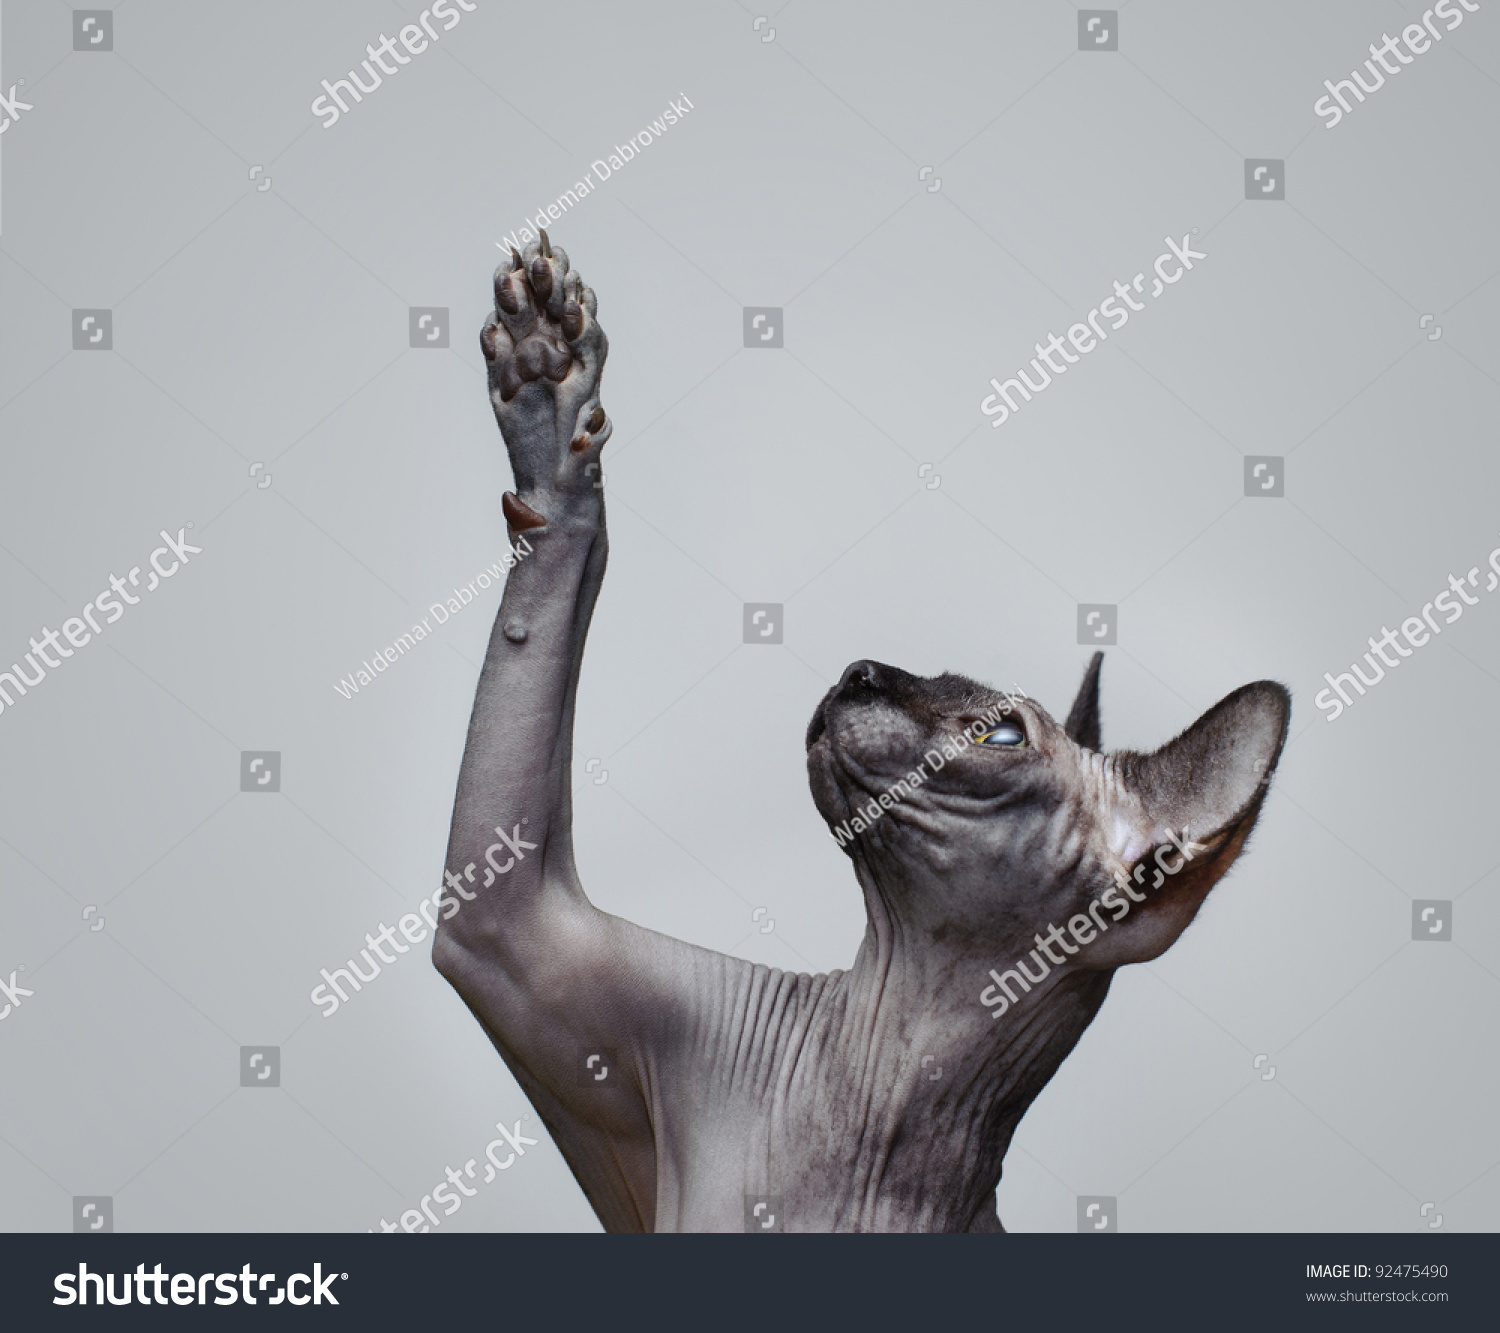 Canadian sphynx cat  lifting its paw #92475490